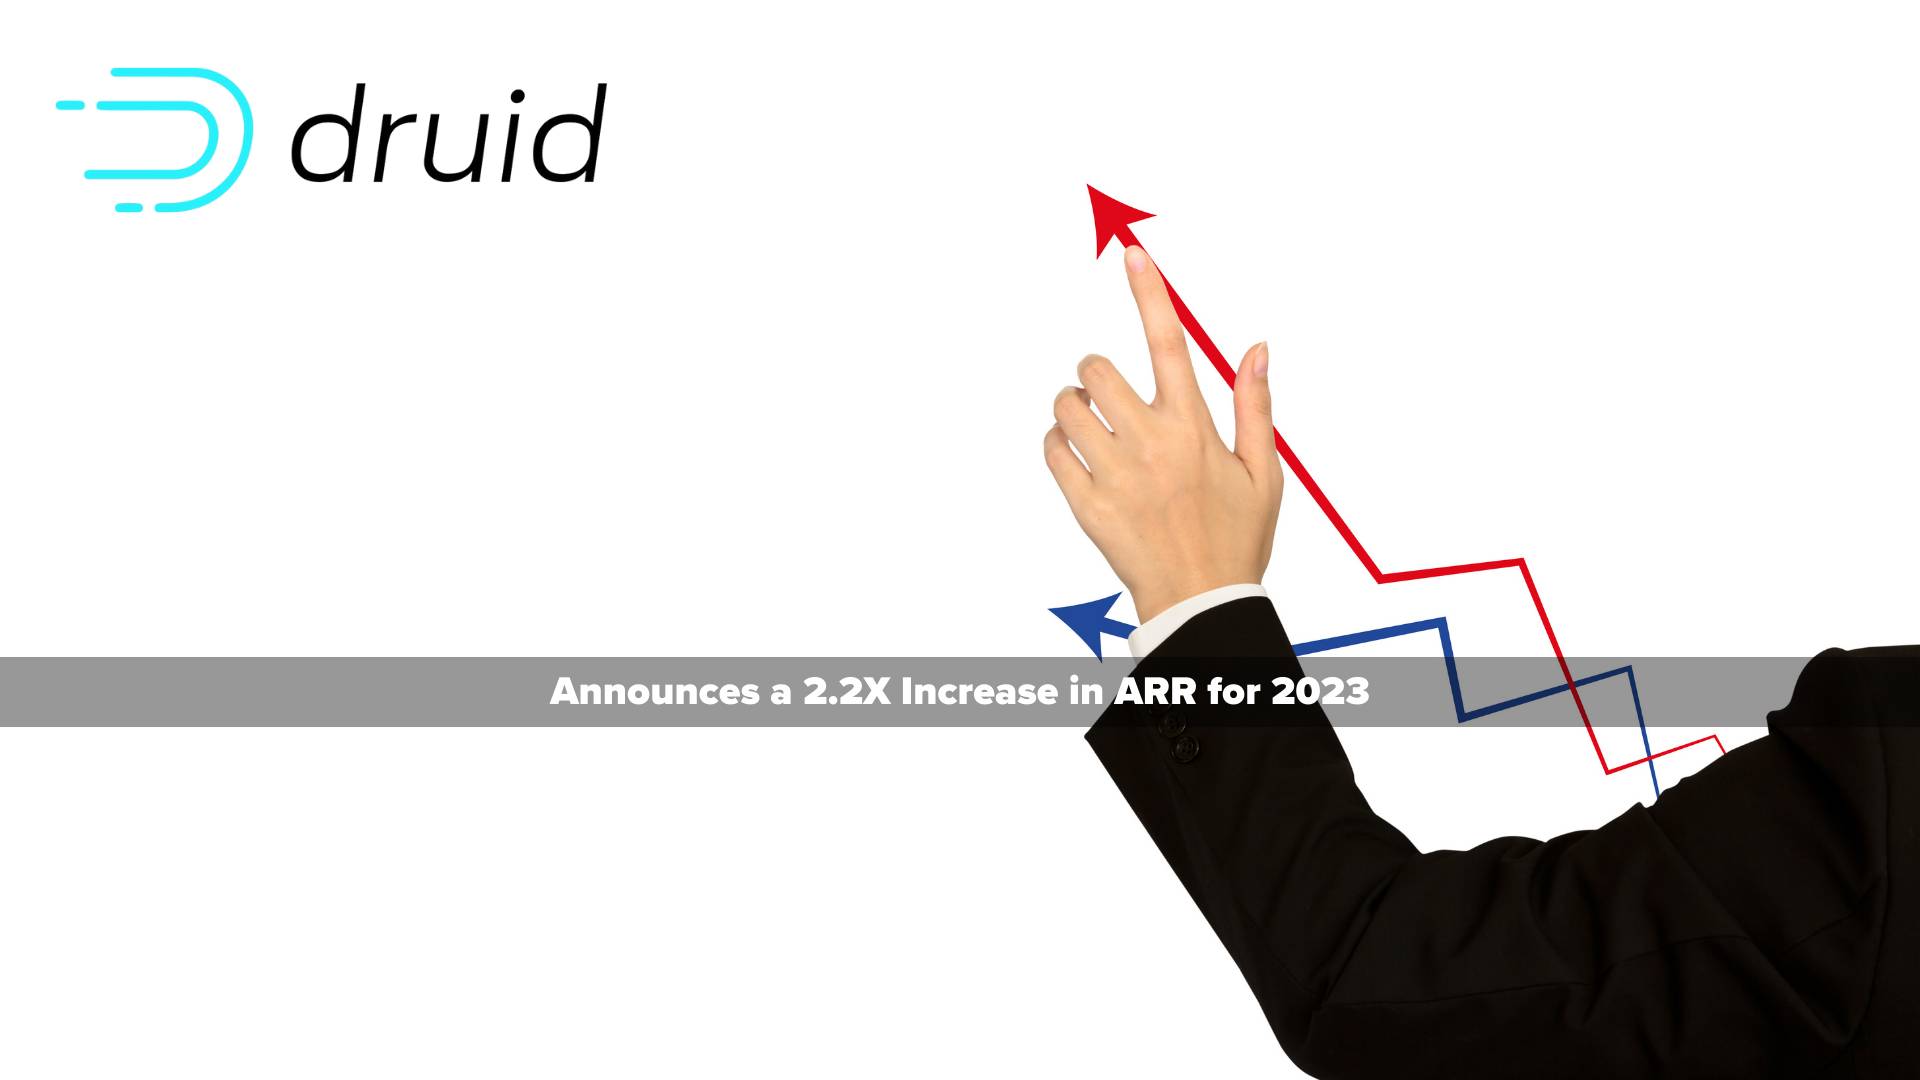 DRUID Announces a 2.2X Increase in ARR for 2023